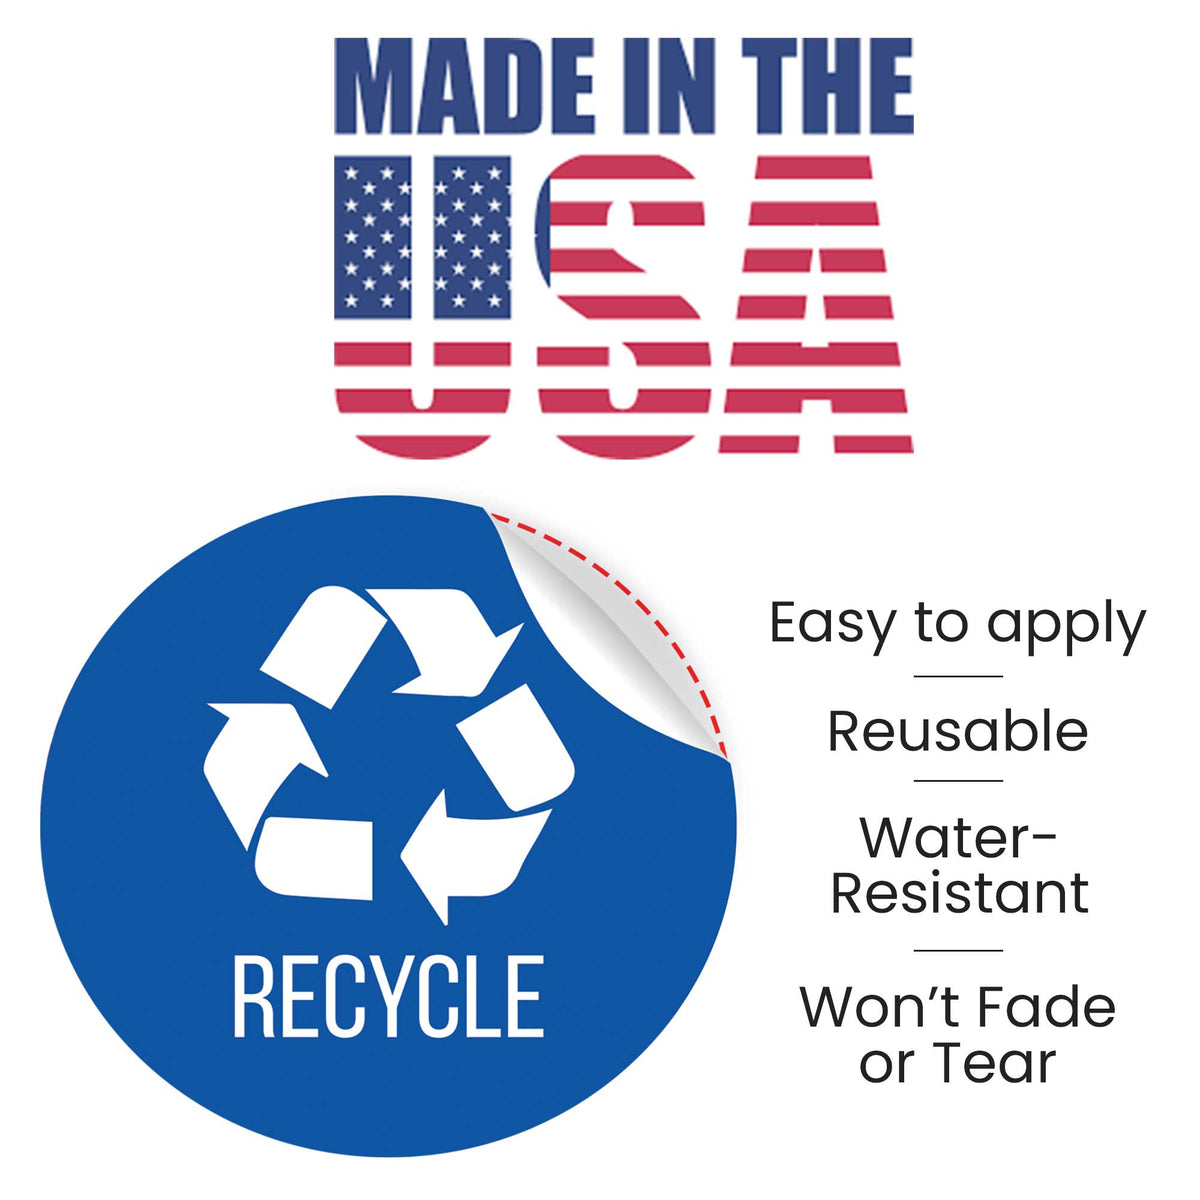 Made in the USA; Easy to apply, reusable, water-resistant, won't fade or tear